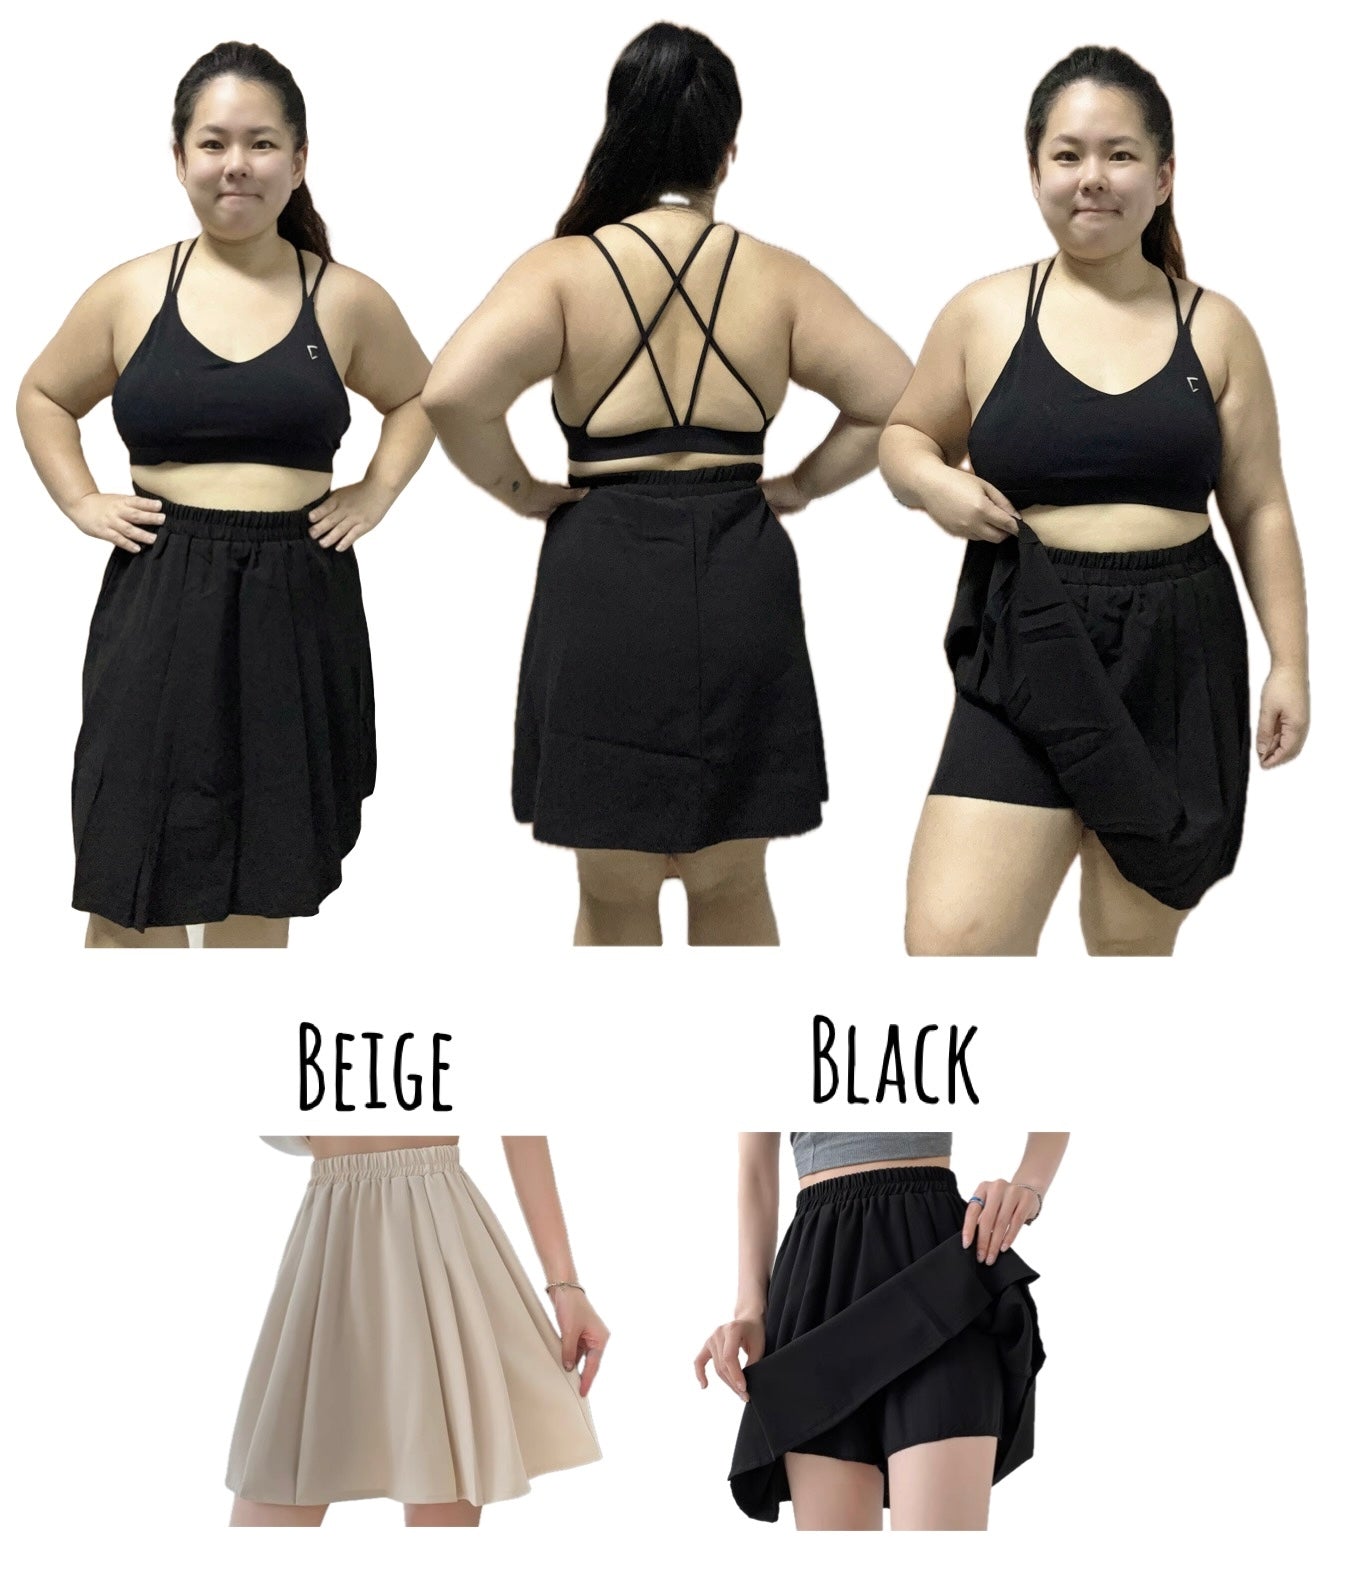 Everyday ice skirt skorts (a line skirt style) Sizing fits S ladies to 2XL ladies